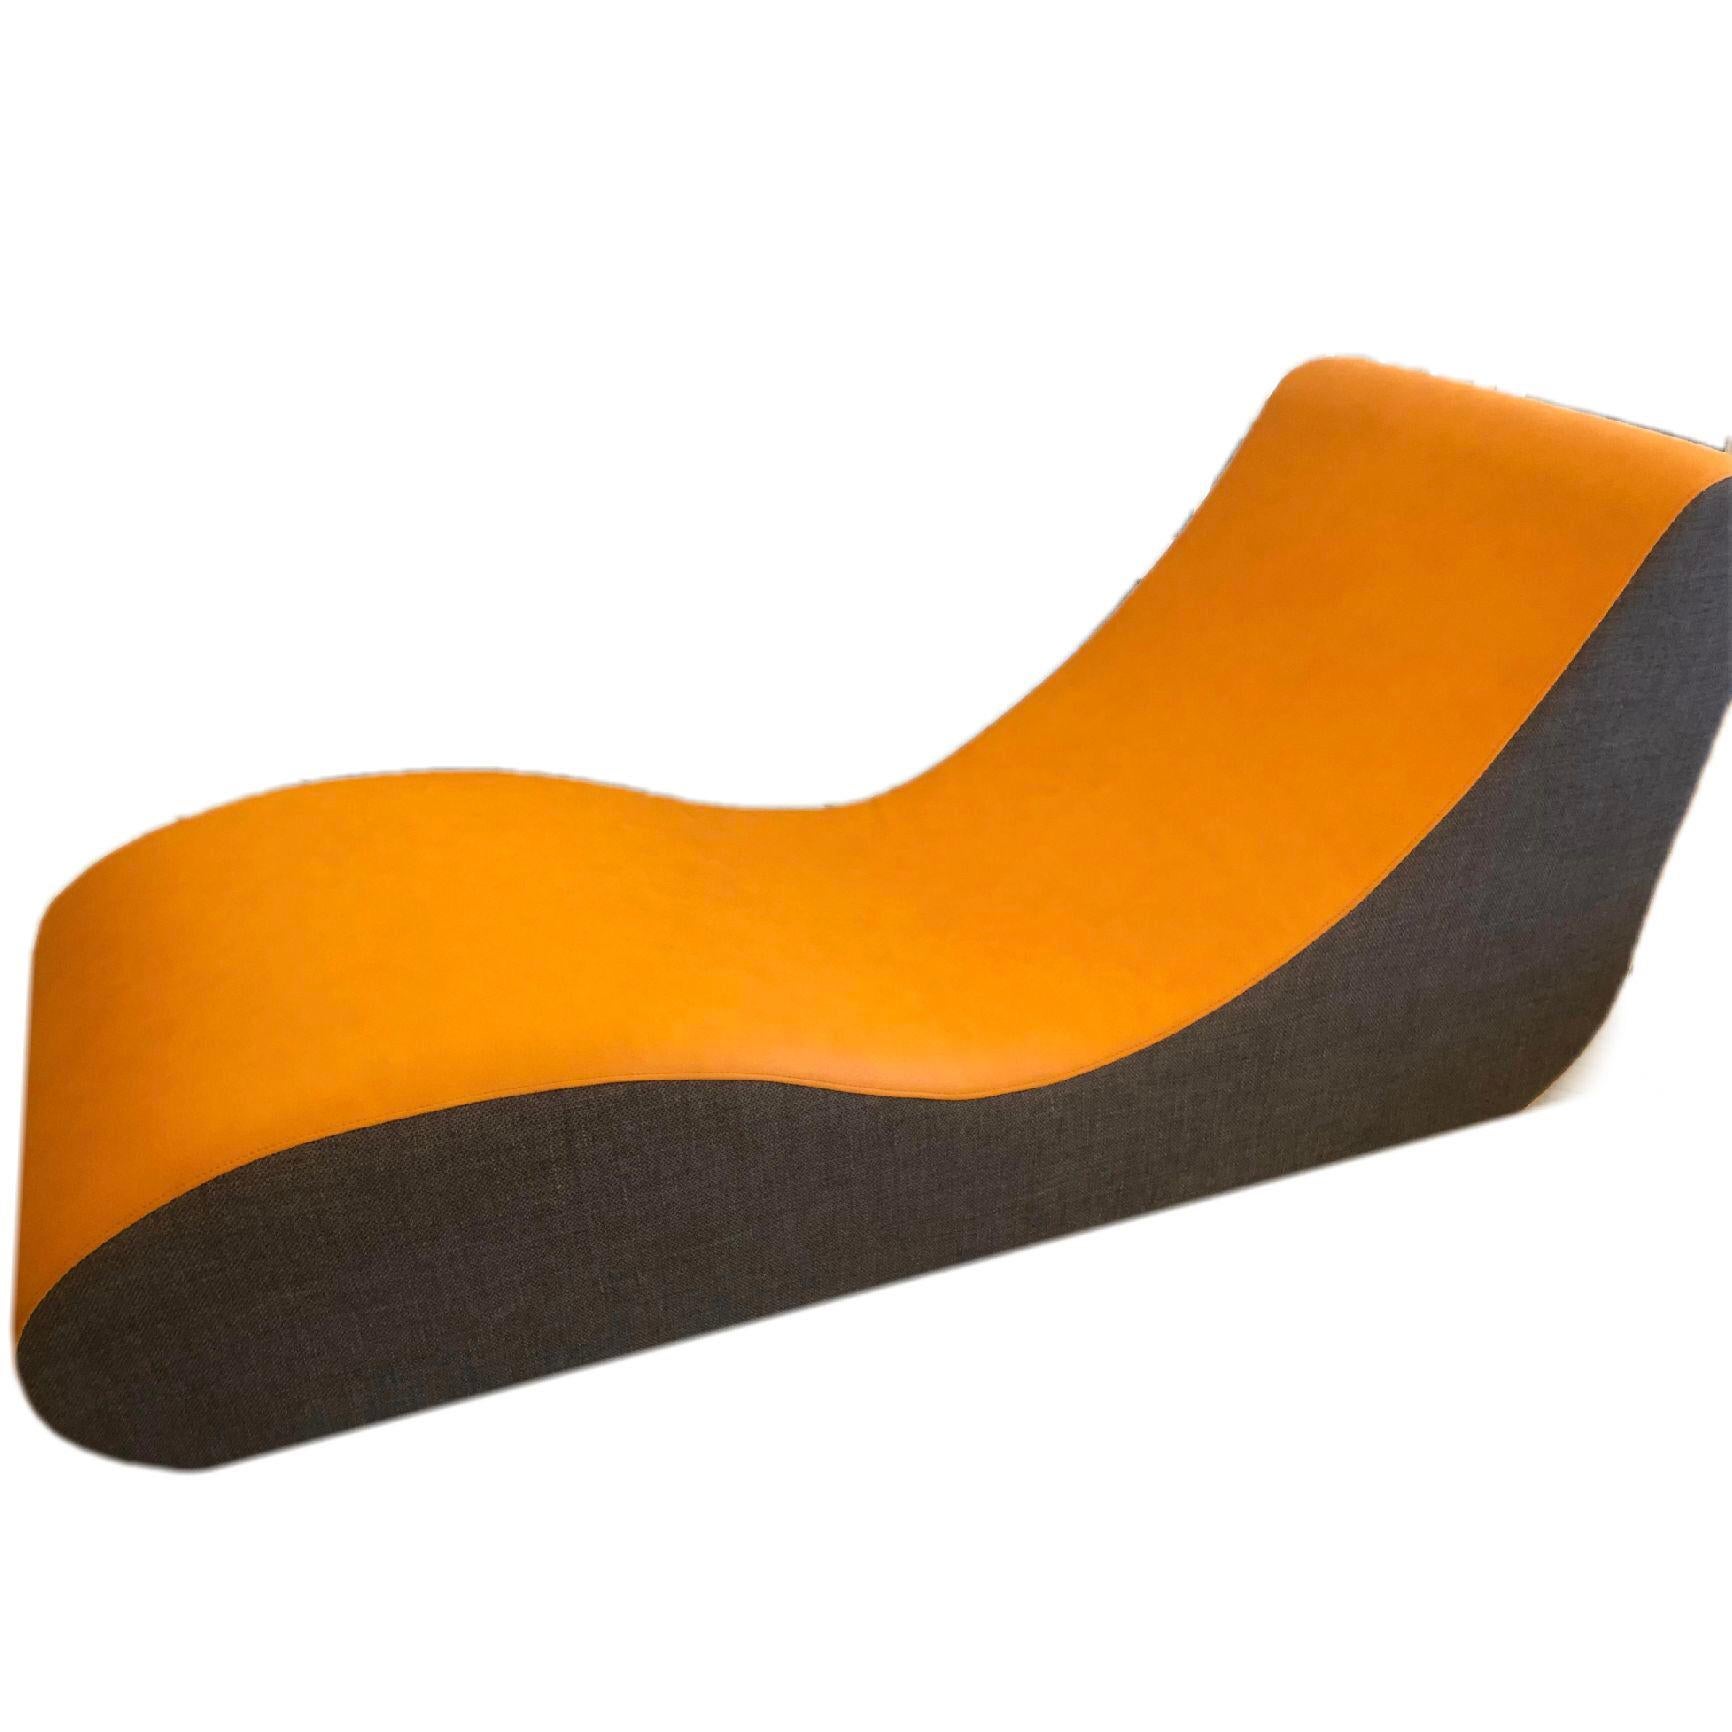 Verner Panton for Verpan 
WELLE 4
Low lounge seating, 1969

Welle series includes six different units (Welle 1-6) that can be used on their own, in pairs, triplets or randomly mixed to create quite a groovy Scandinavian Modern “low lounge